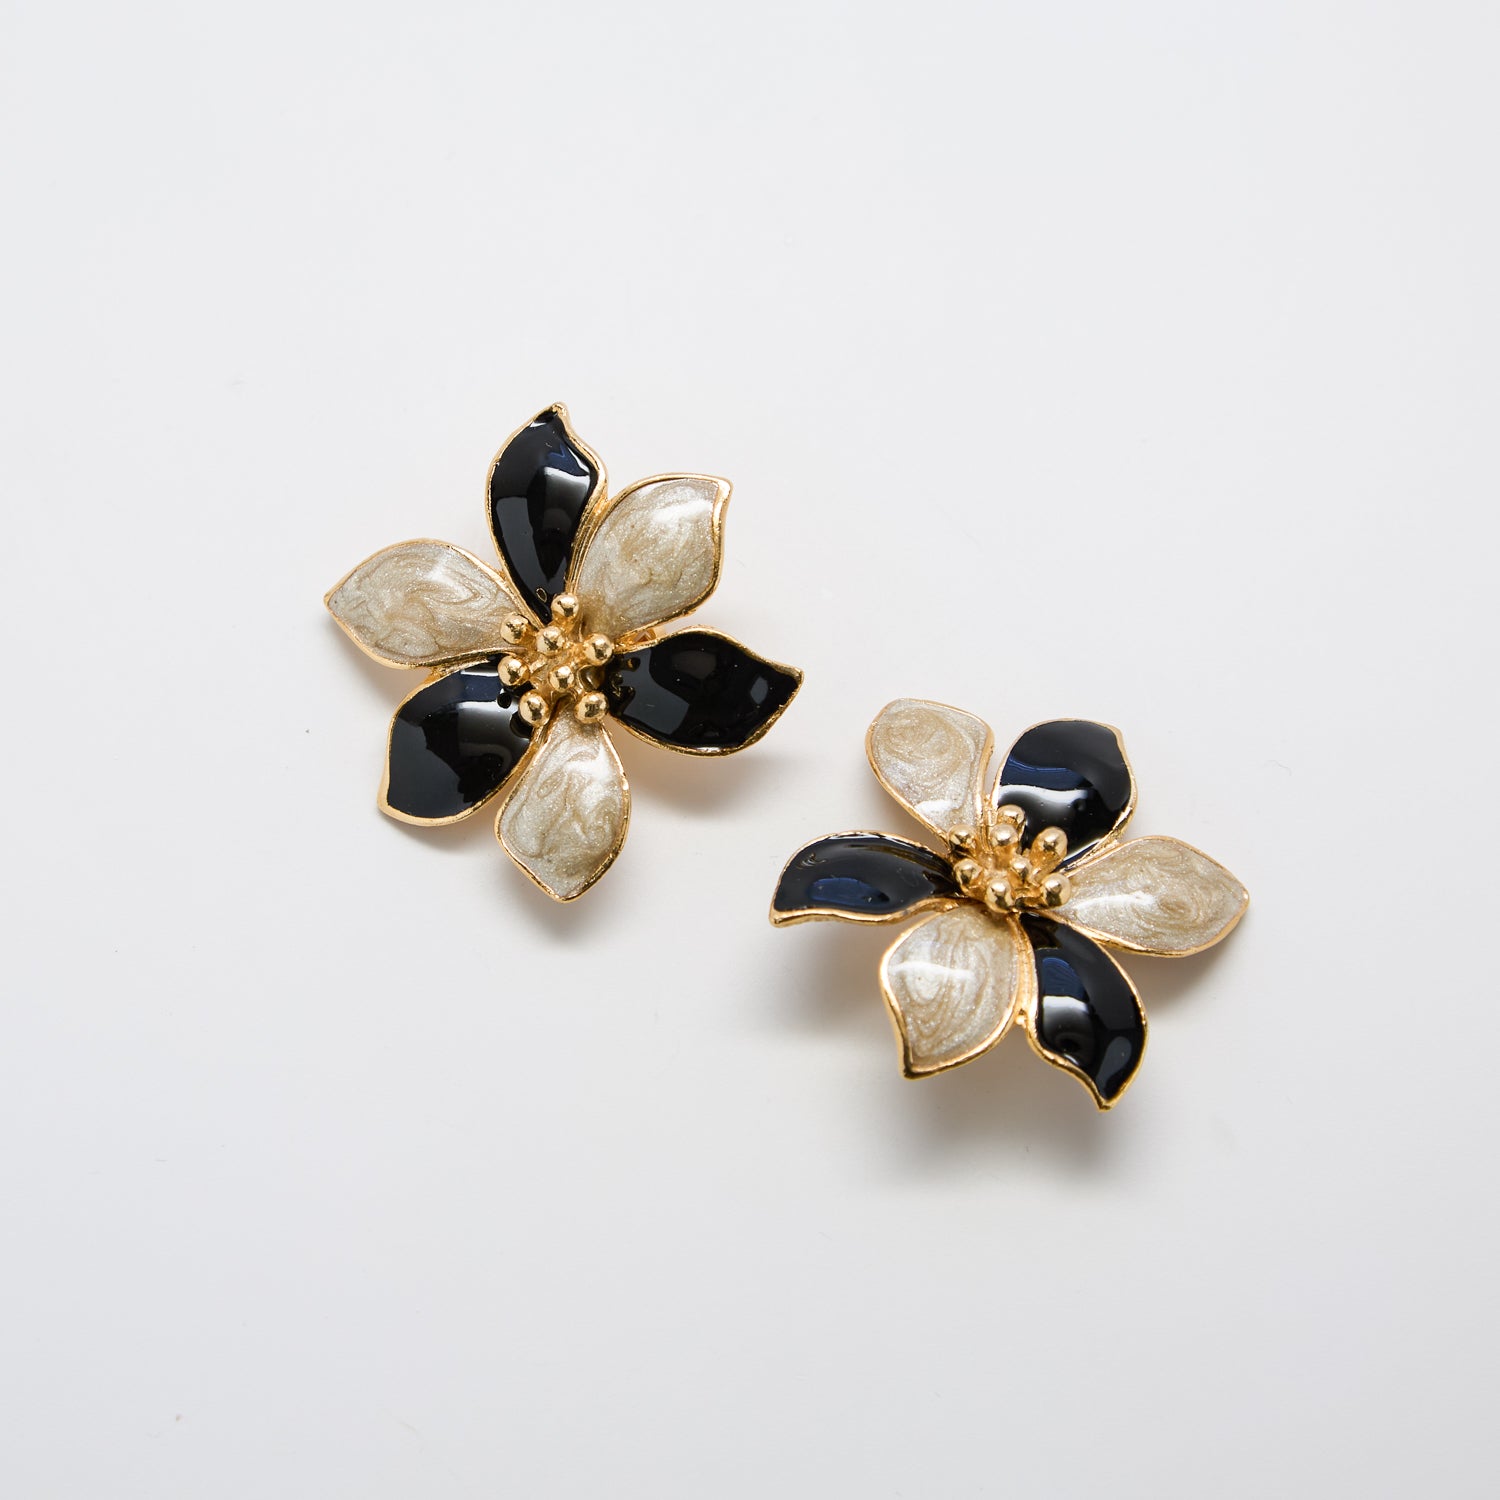 Vintage Black and White Clip-on Earrings